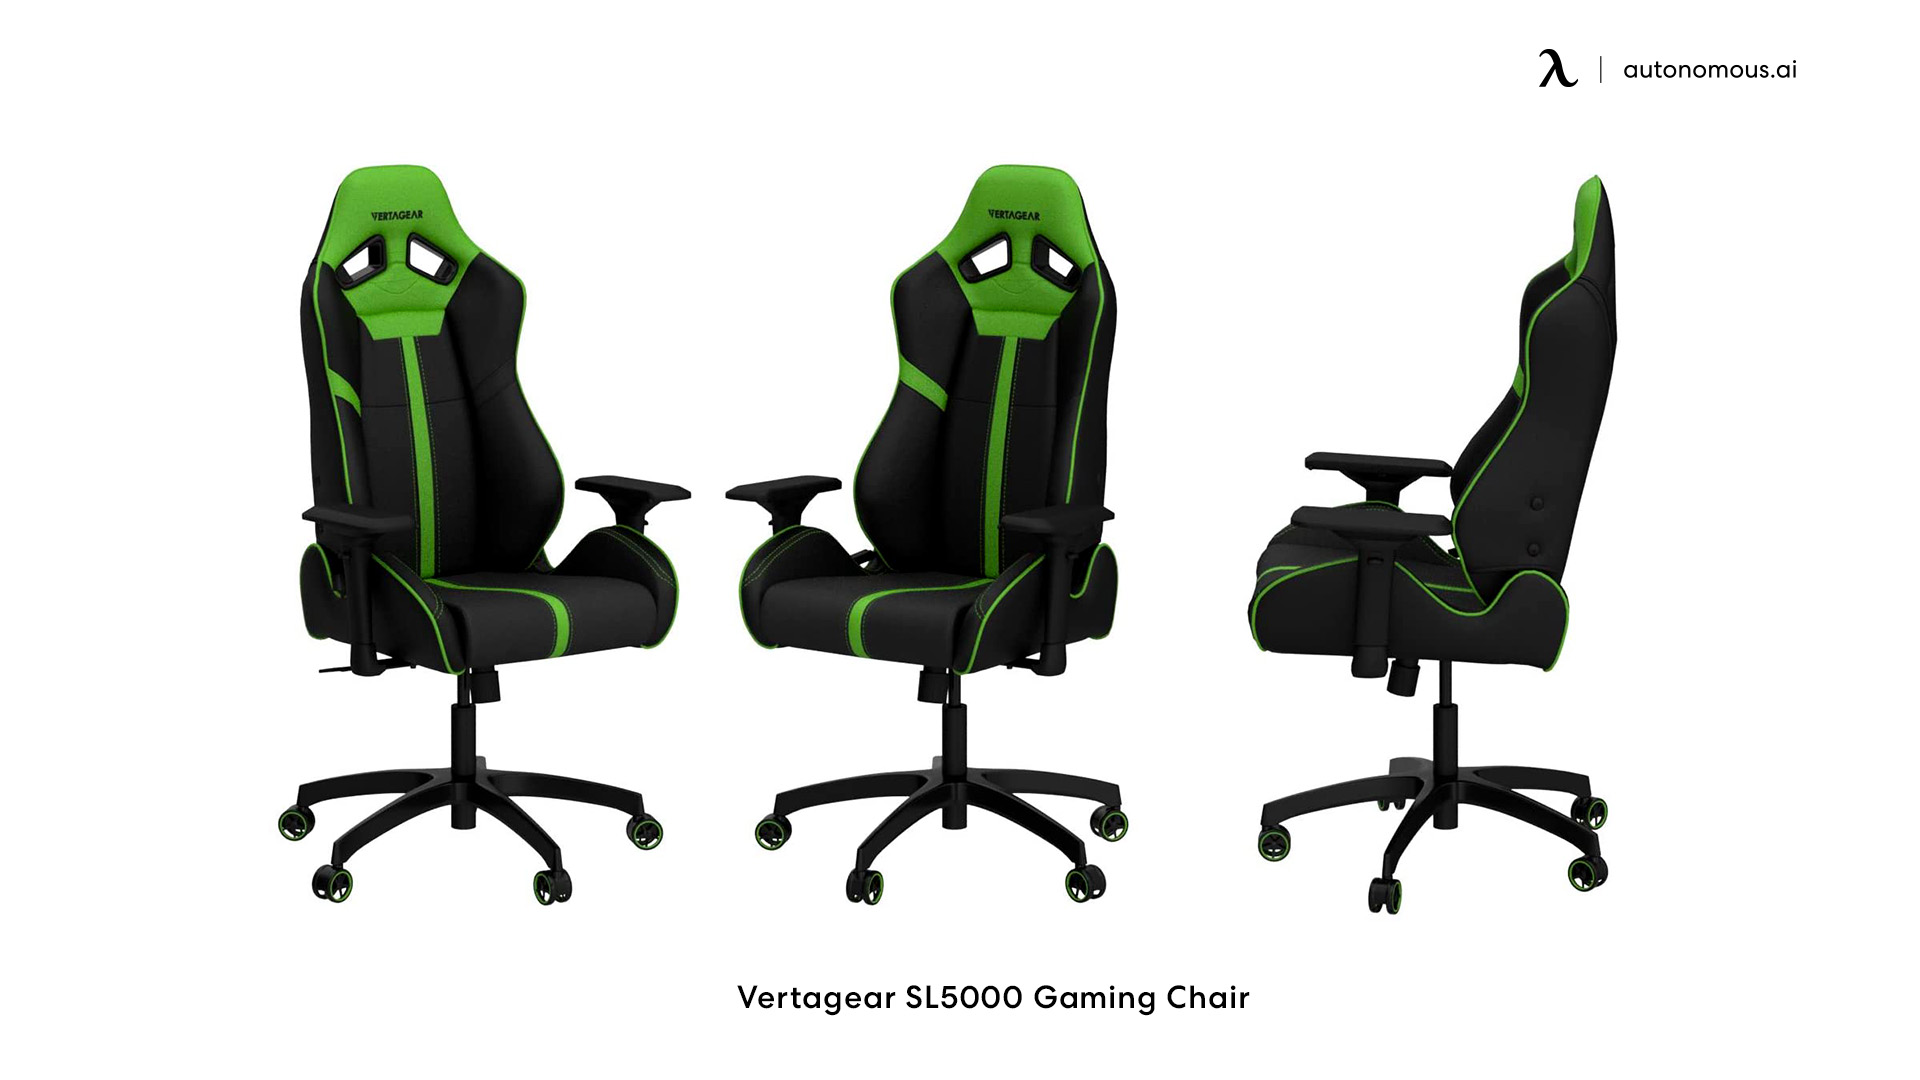 SL5000 black leather gaming chair by Vertagear